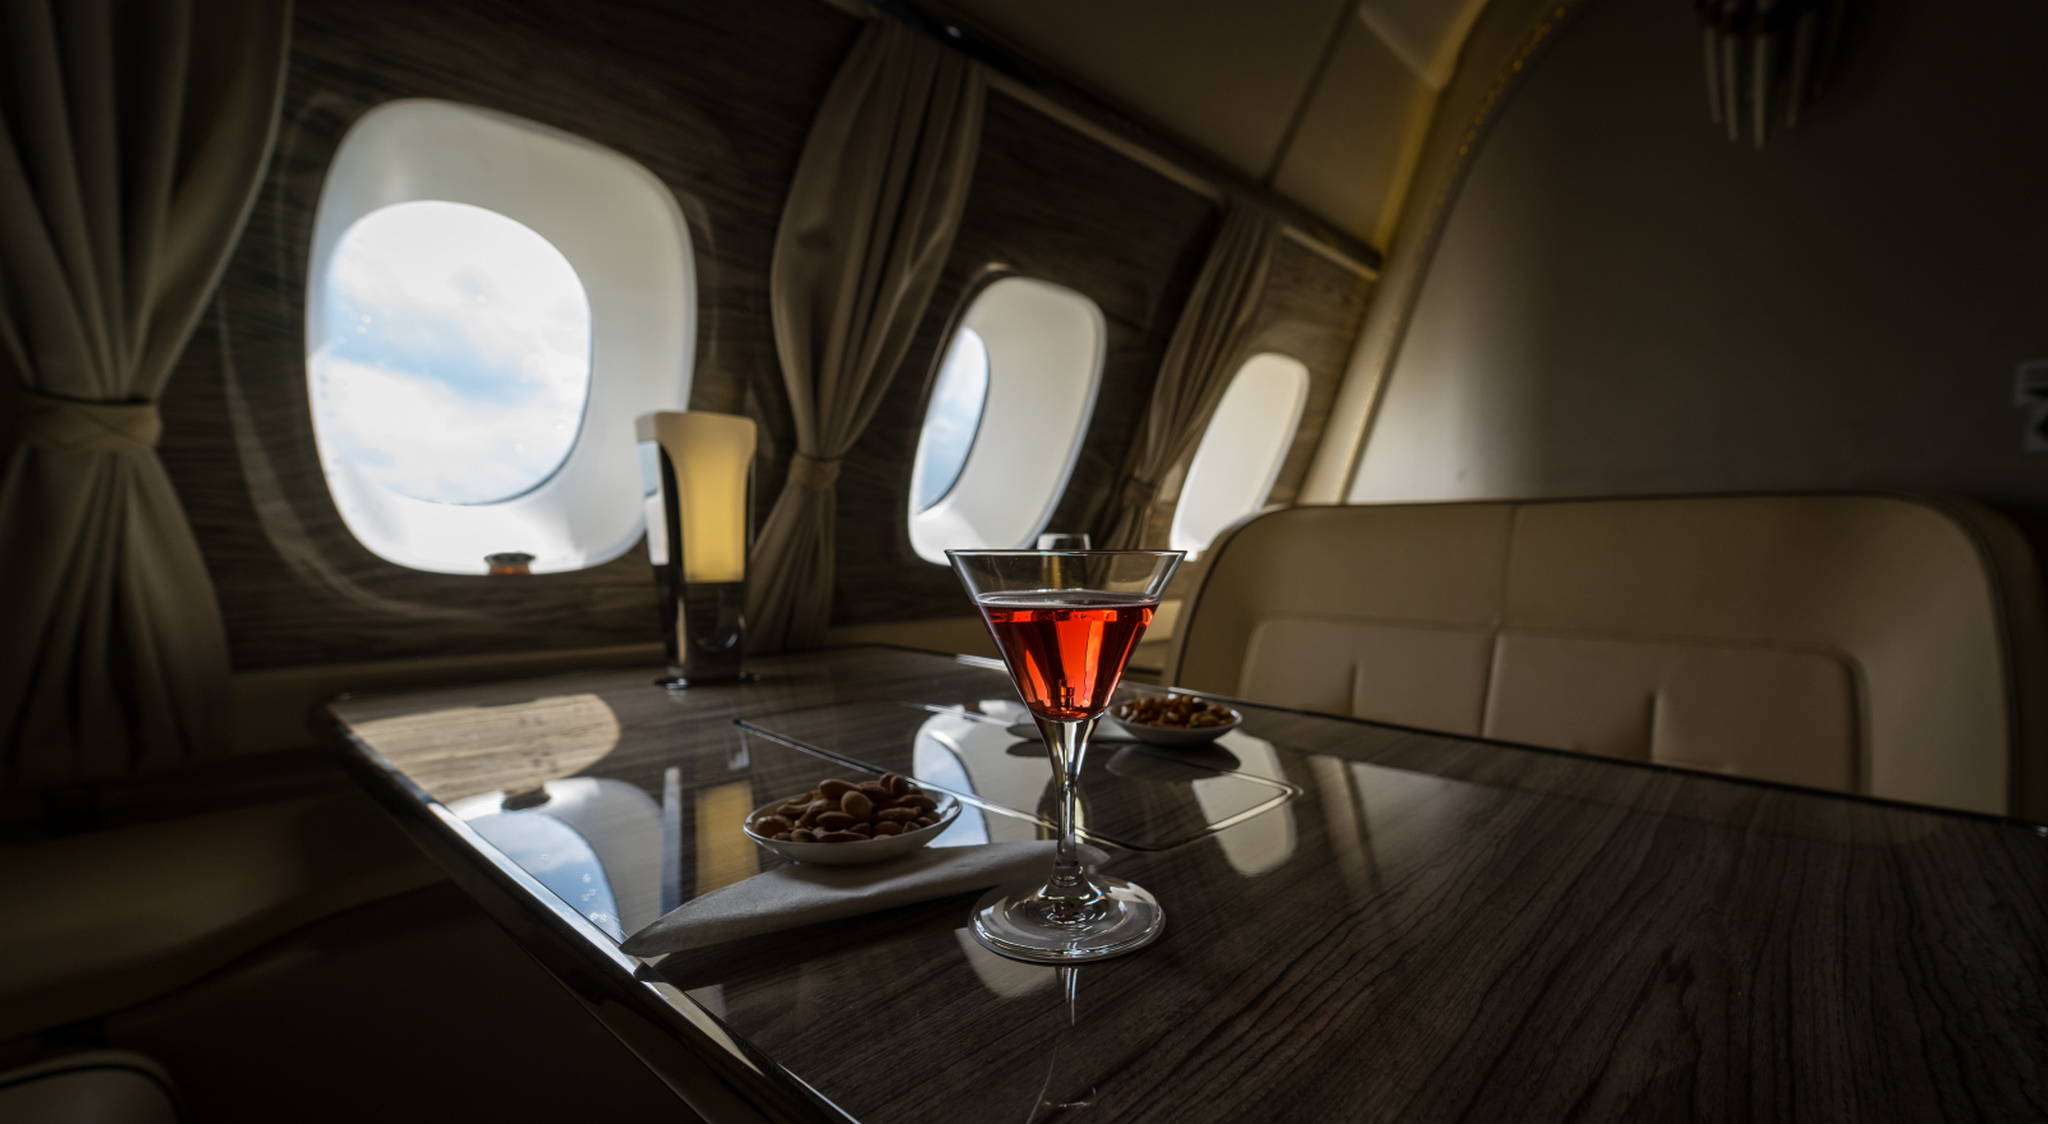 business class table on private plane